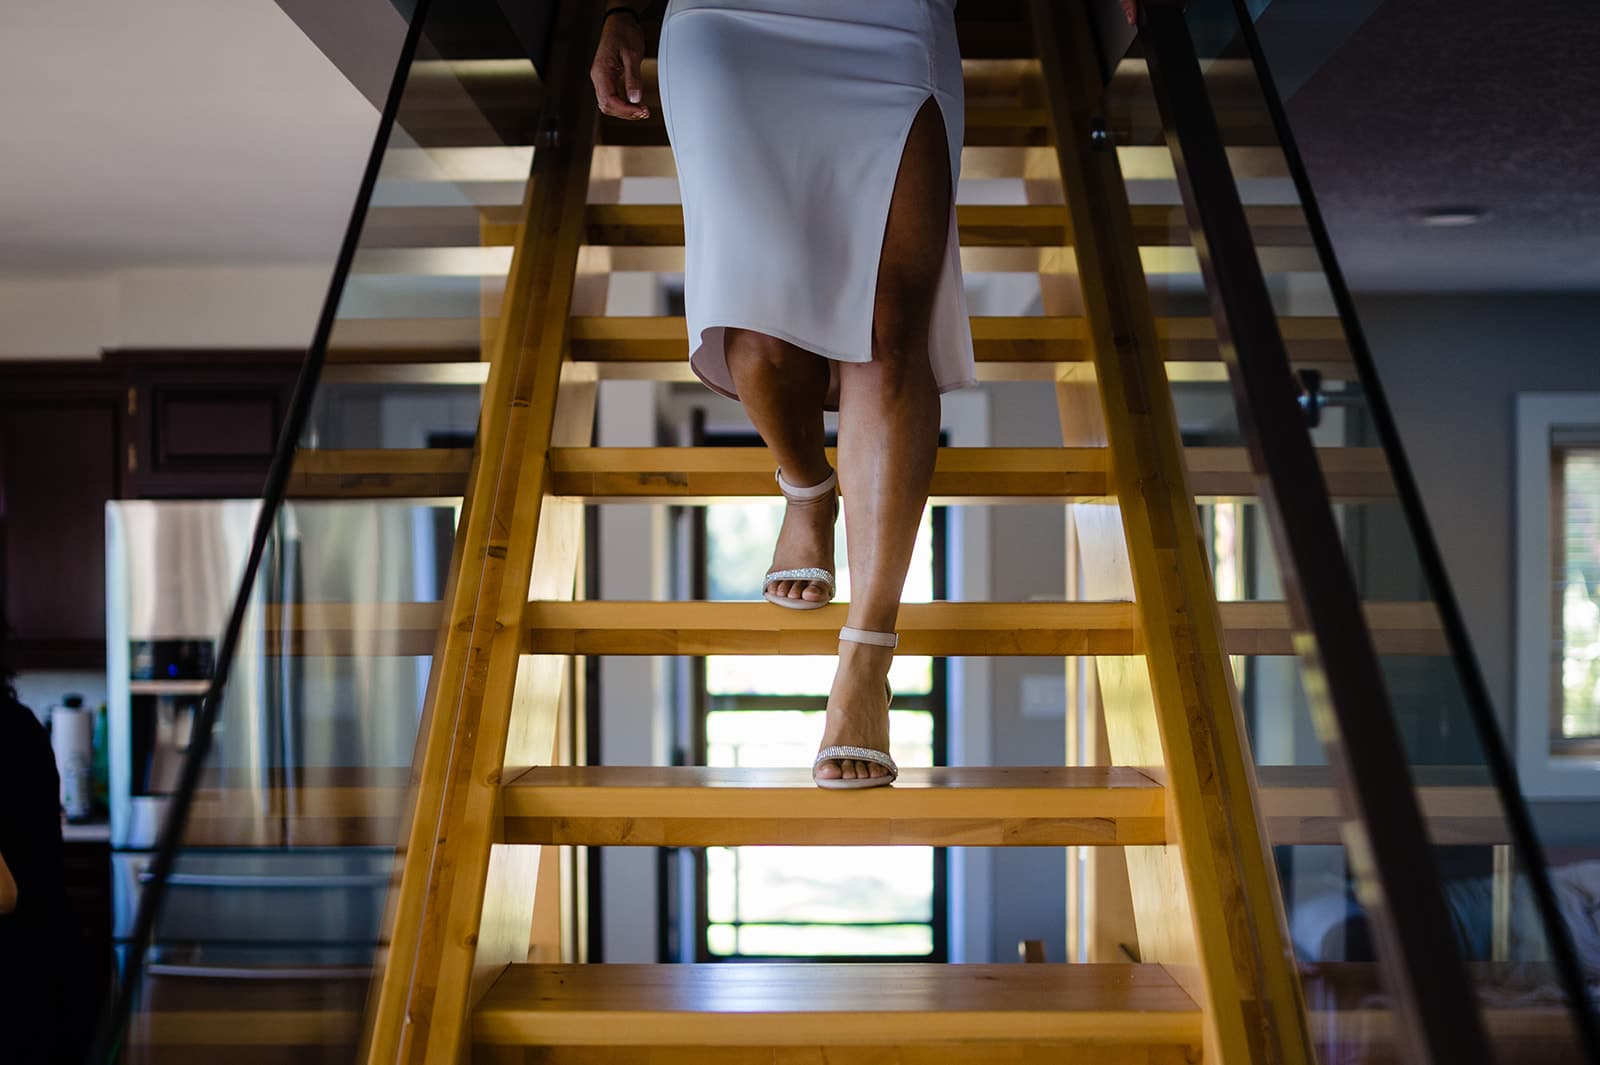 Bride takes some of her final steps as a single woman down the wooden floating staircase before she marries her man